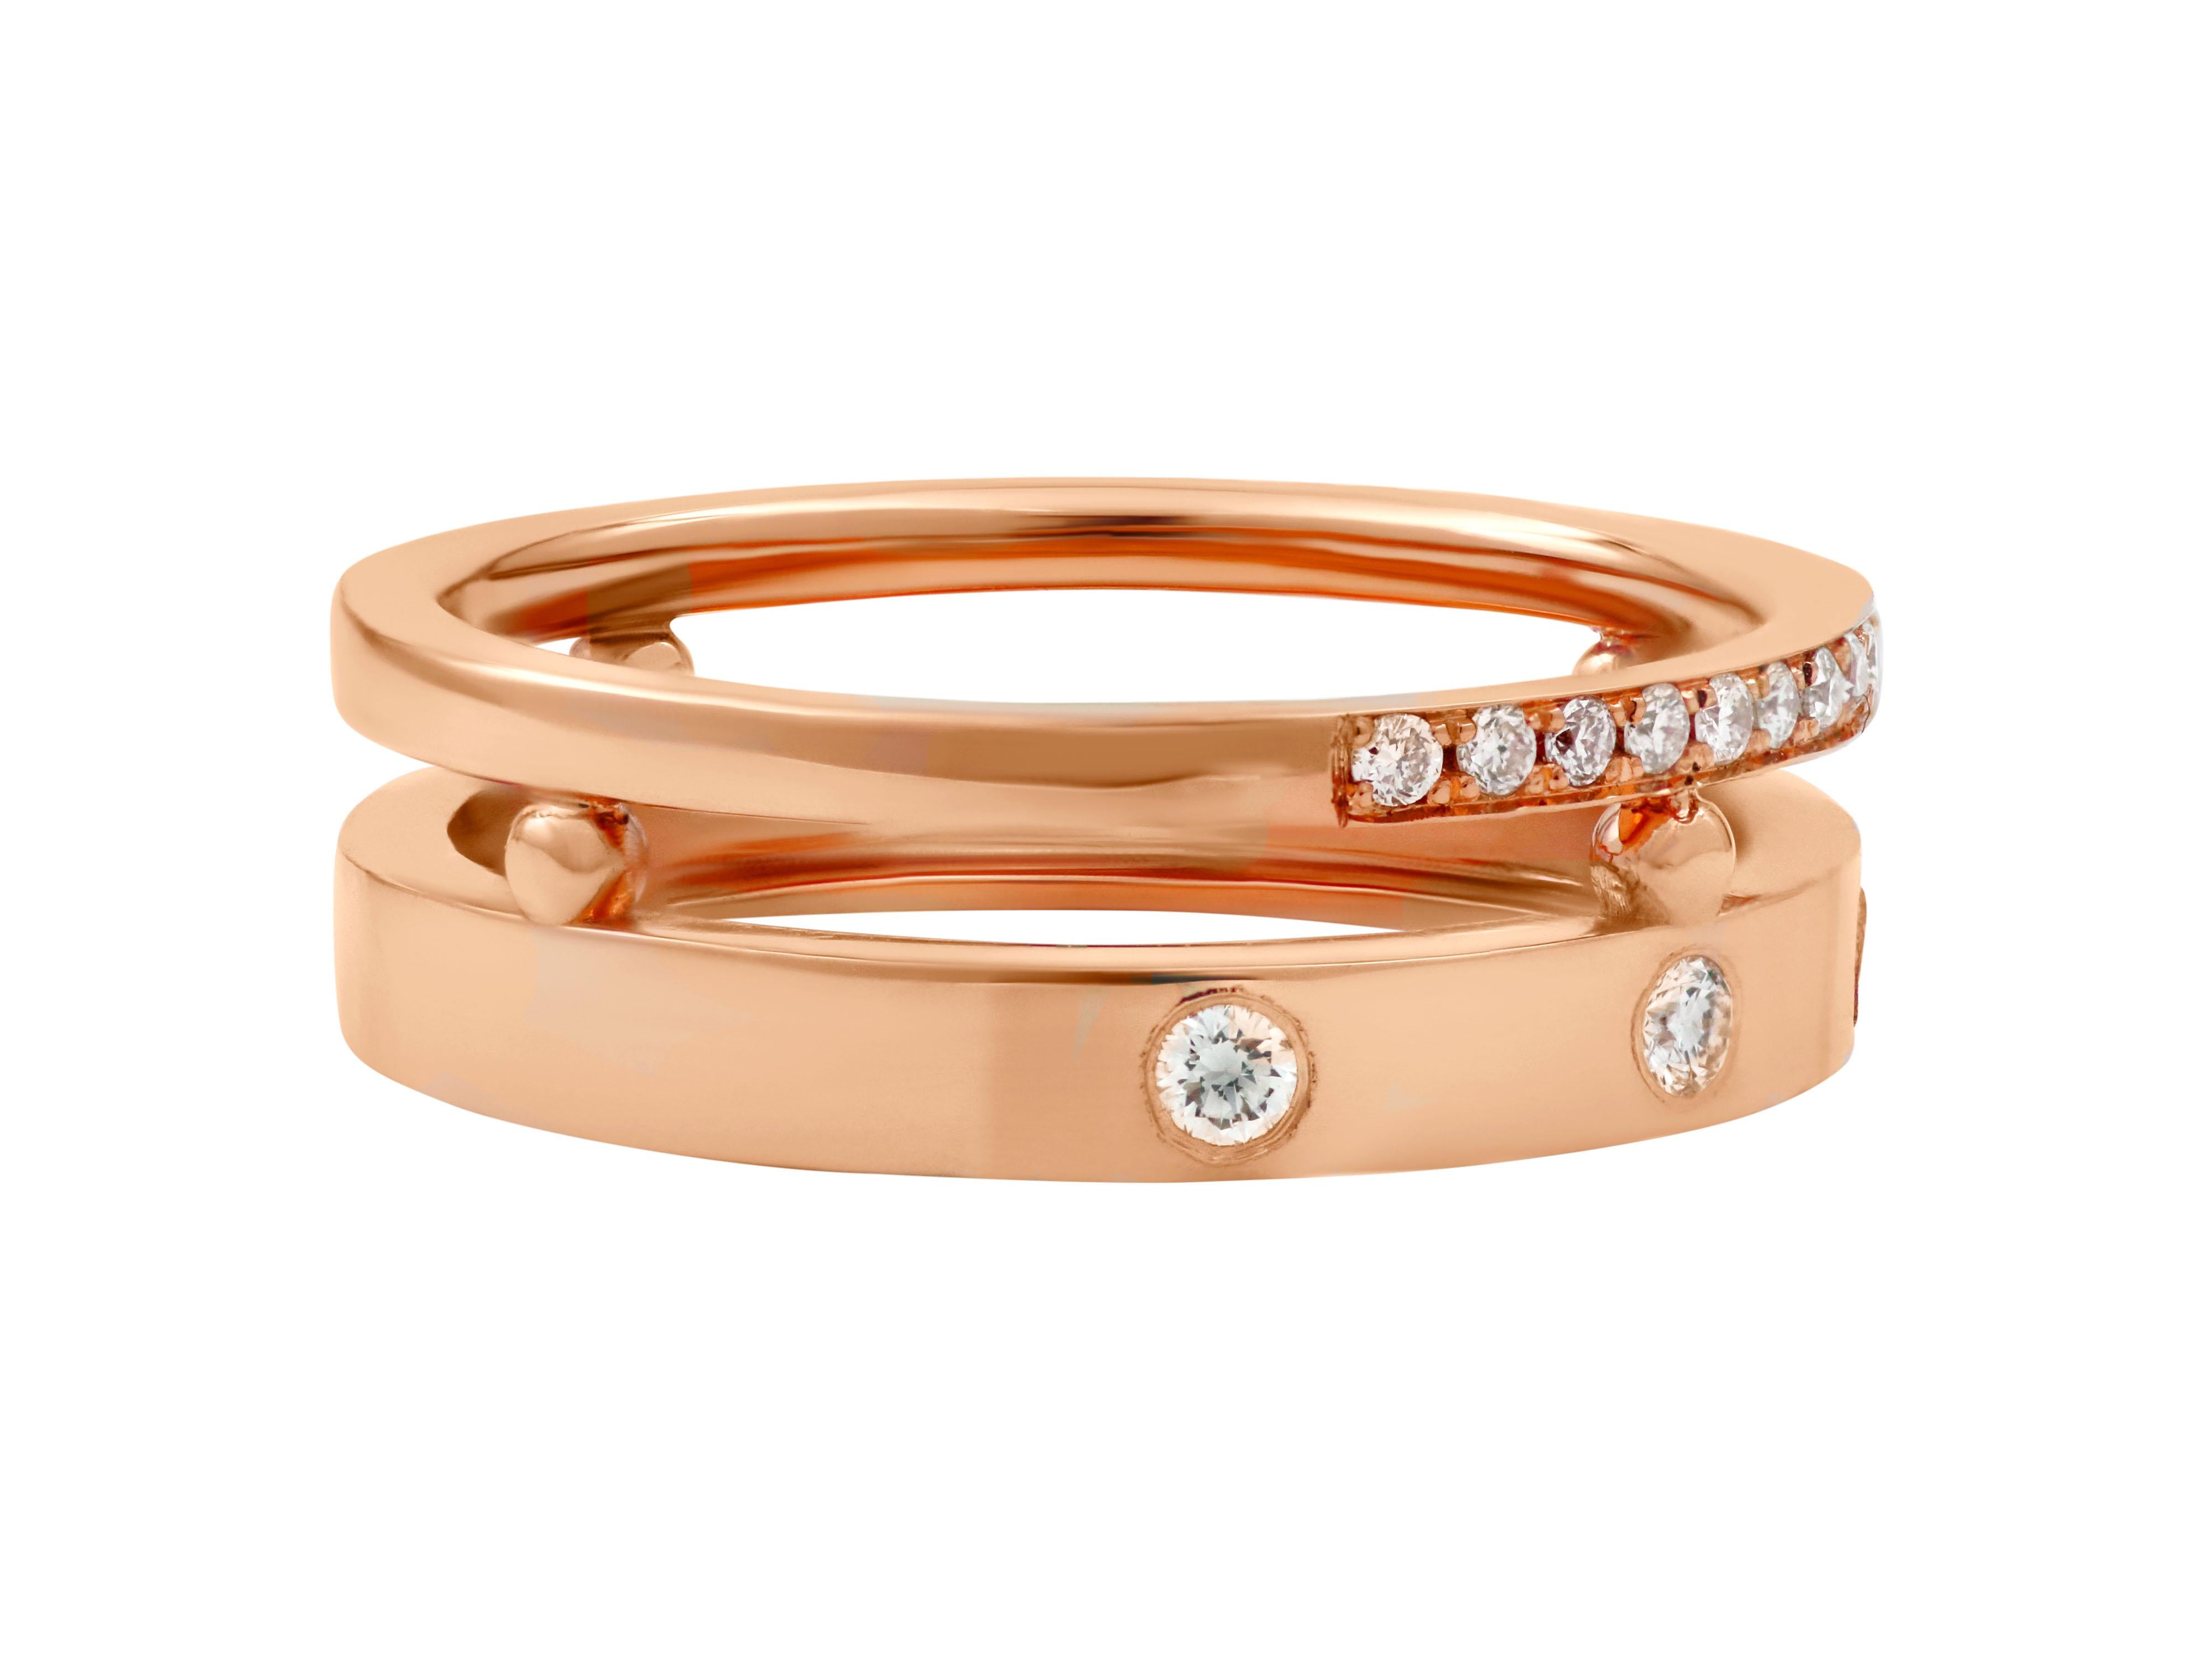 Exquisite 18k rose gold double band ring with 0.40 carats brilliant cut diamonds.

Band width: 0.236”, 0.6cm